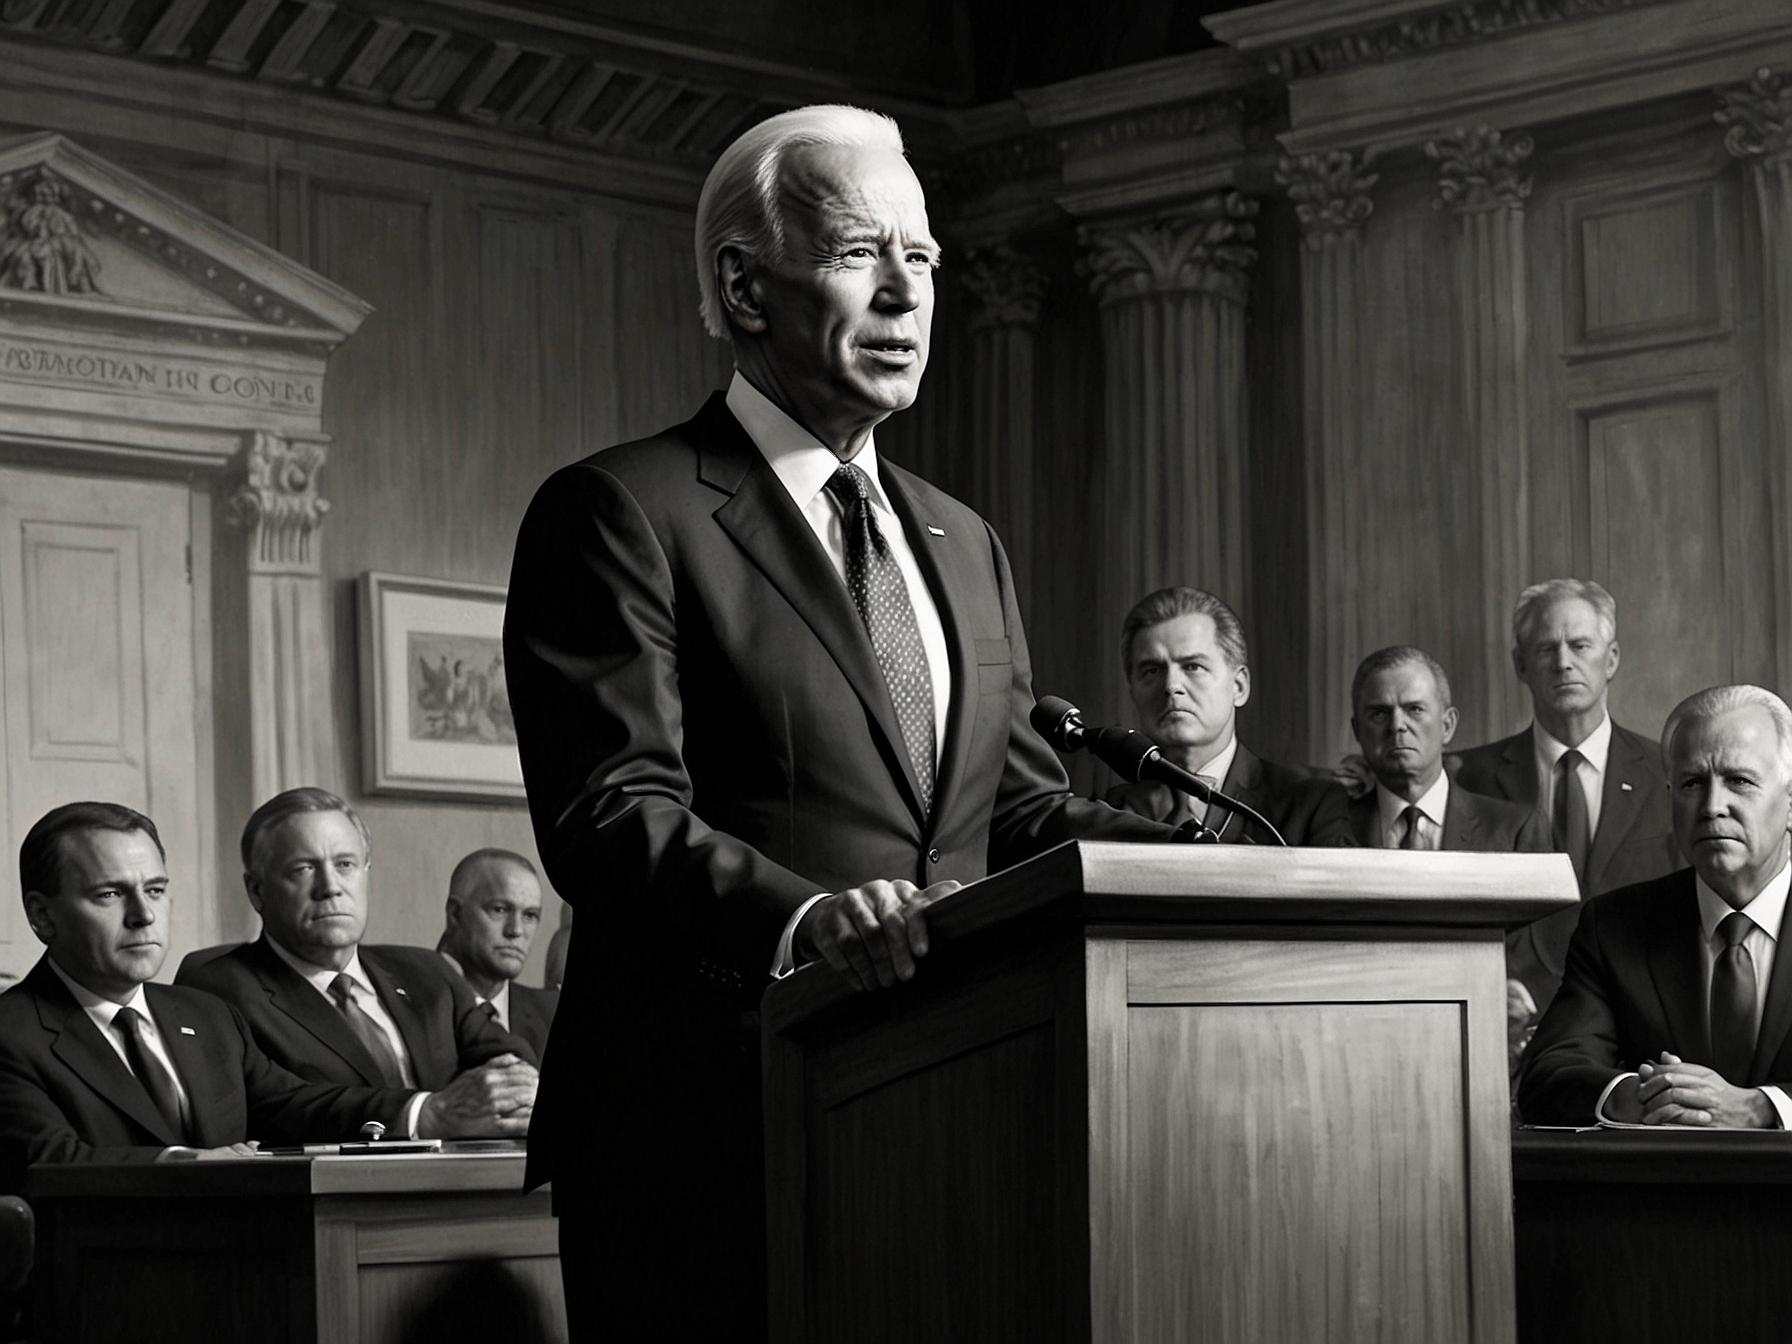 President Joe Biden stands at a podium during a debate preparation session, surrounded by advisers, preparing to adopt an assertive strategy against former President Donald Trump.